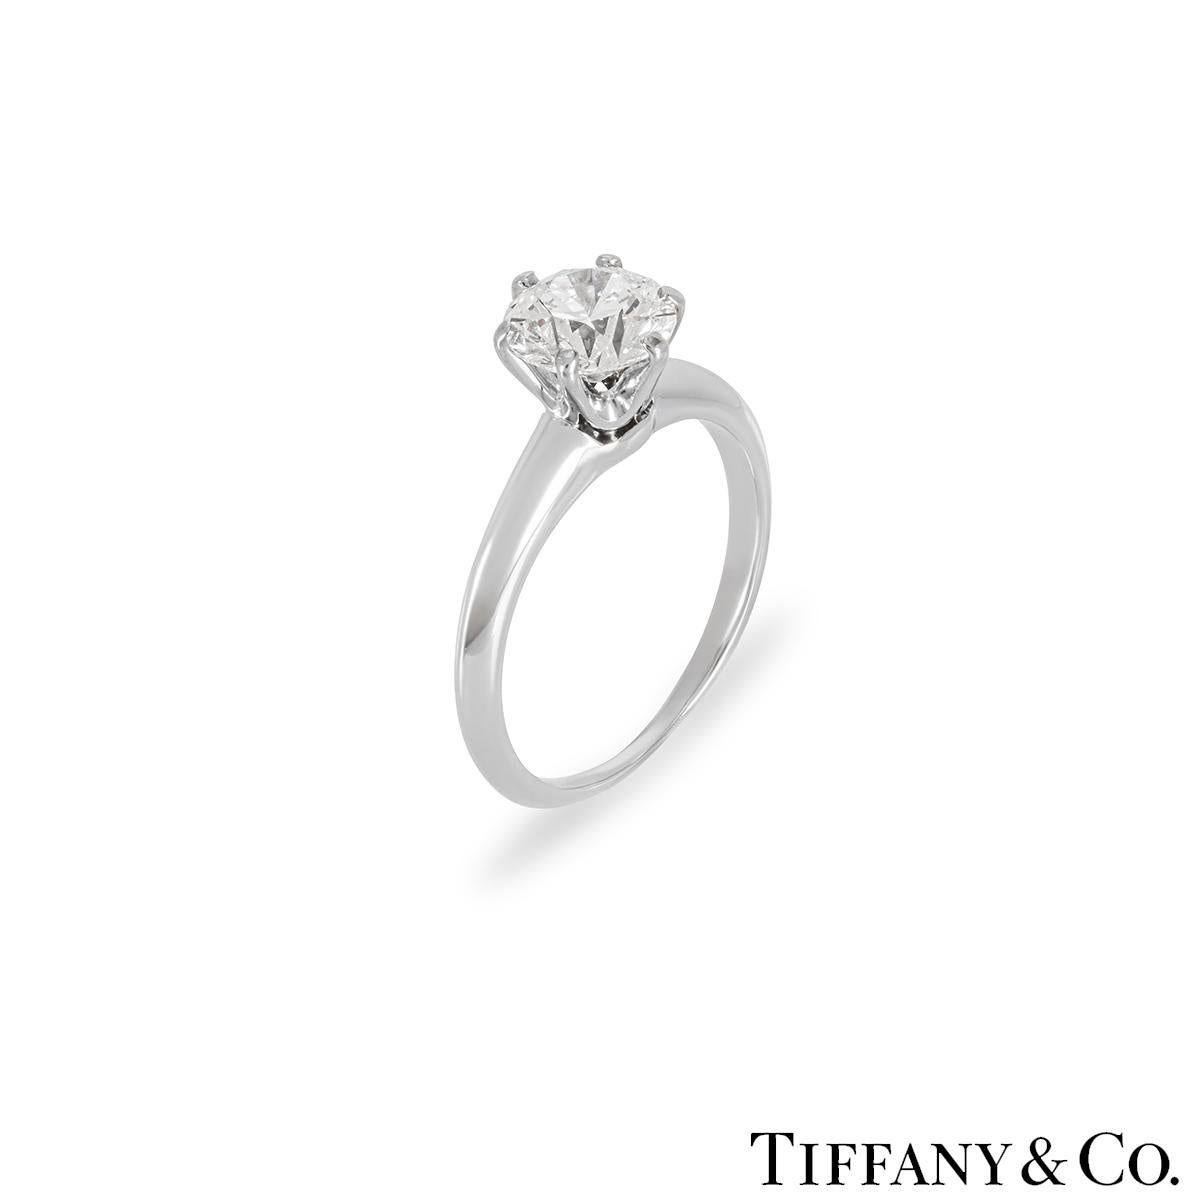 A stunning platinum diamond solitaire ring by Tiffany & Co. from the Setting collection. The solitaire features a round brilliant cut diamond set to the centre in a 6 prong mount weighing 1.18ct, D colour and VS1 clarity. The diamond scores an